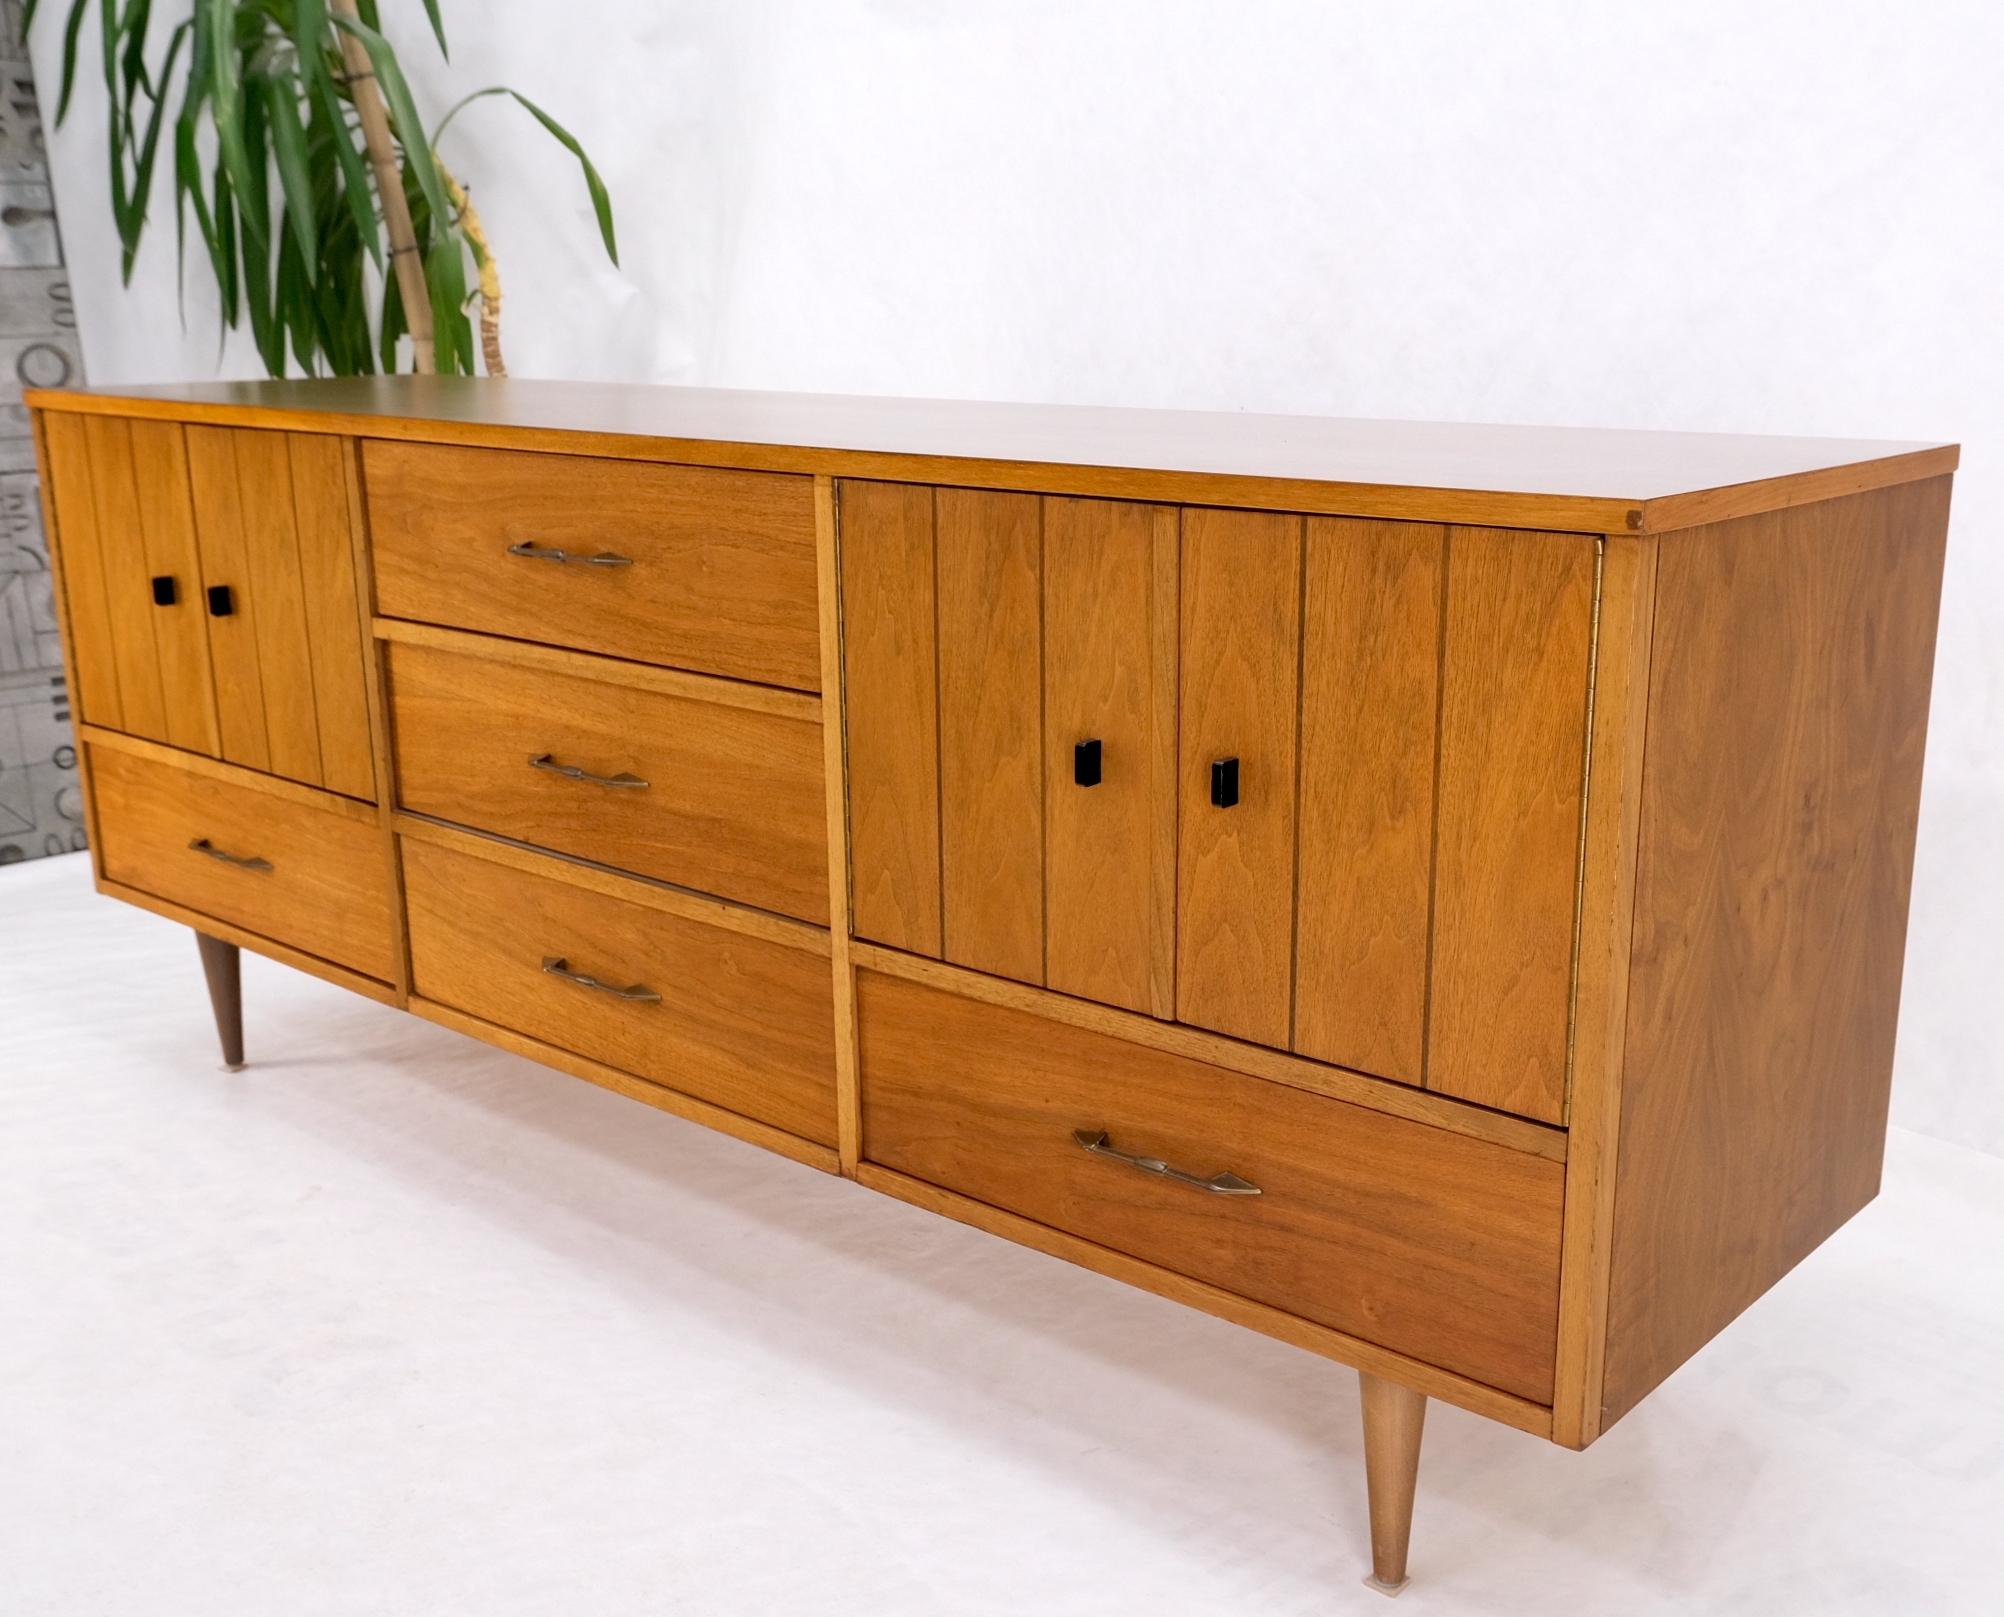 5 Drawers Two Door Compartments Long Walnut Credenza Dresser Dowel Legs Mint! For Sale 10